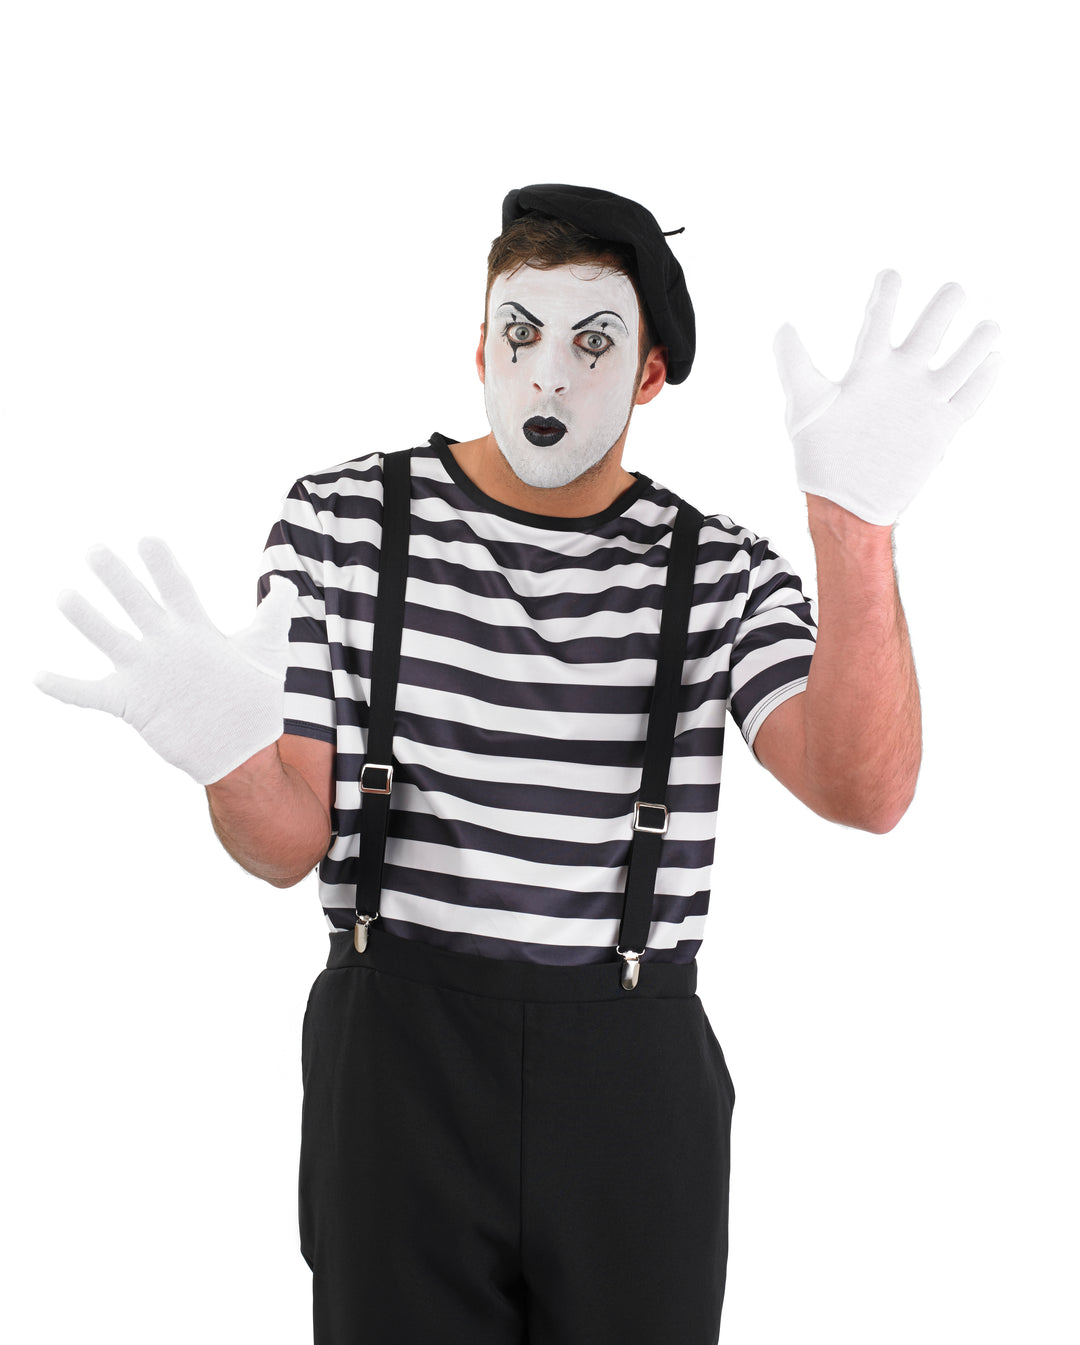 Mens French Clown Mime Street Artist Circus Carnival Costume